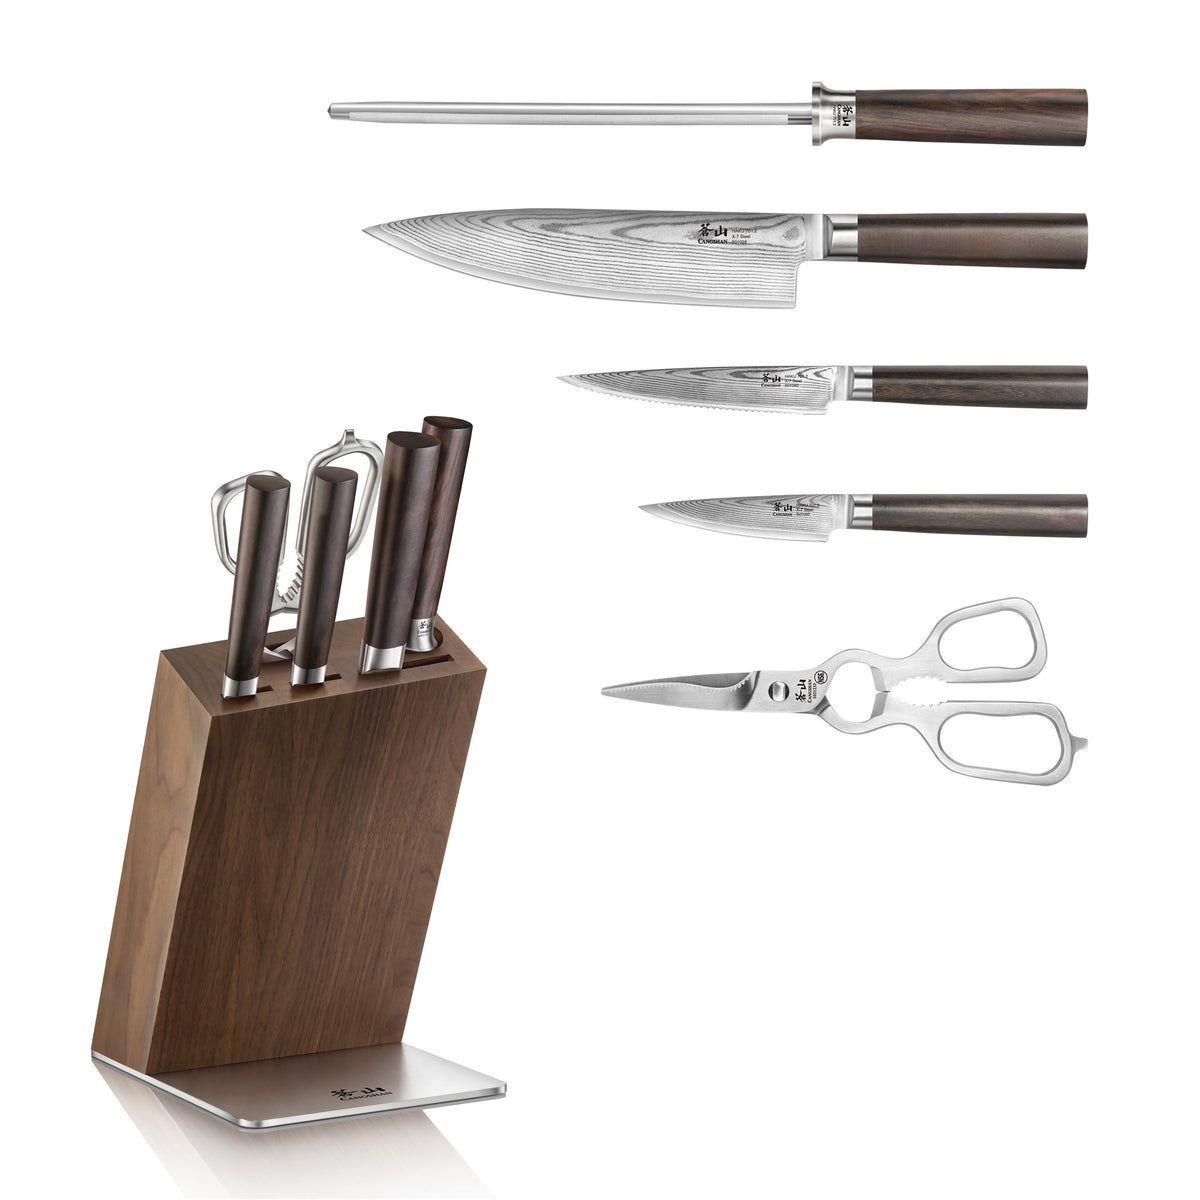 Kincano Kitchen Knife Set, 6-Piece Small Knife Set with Magnetic